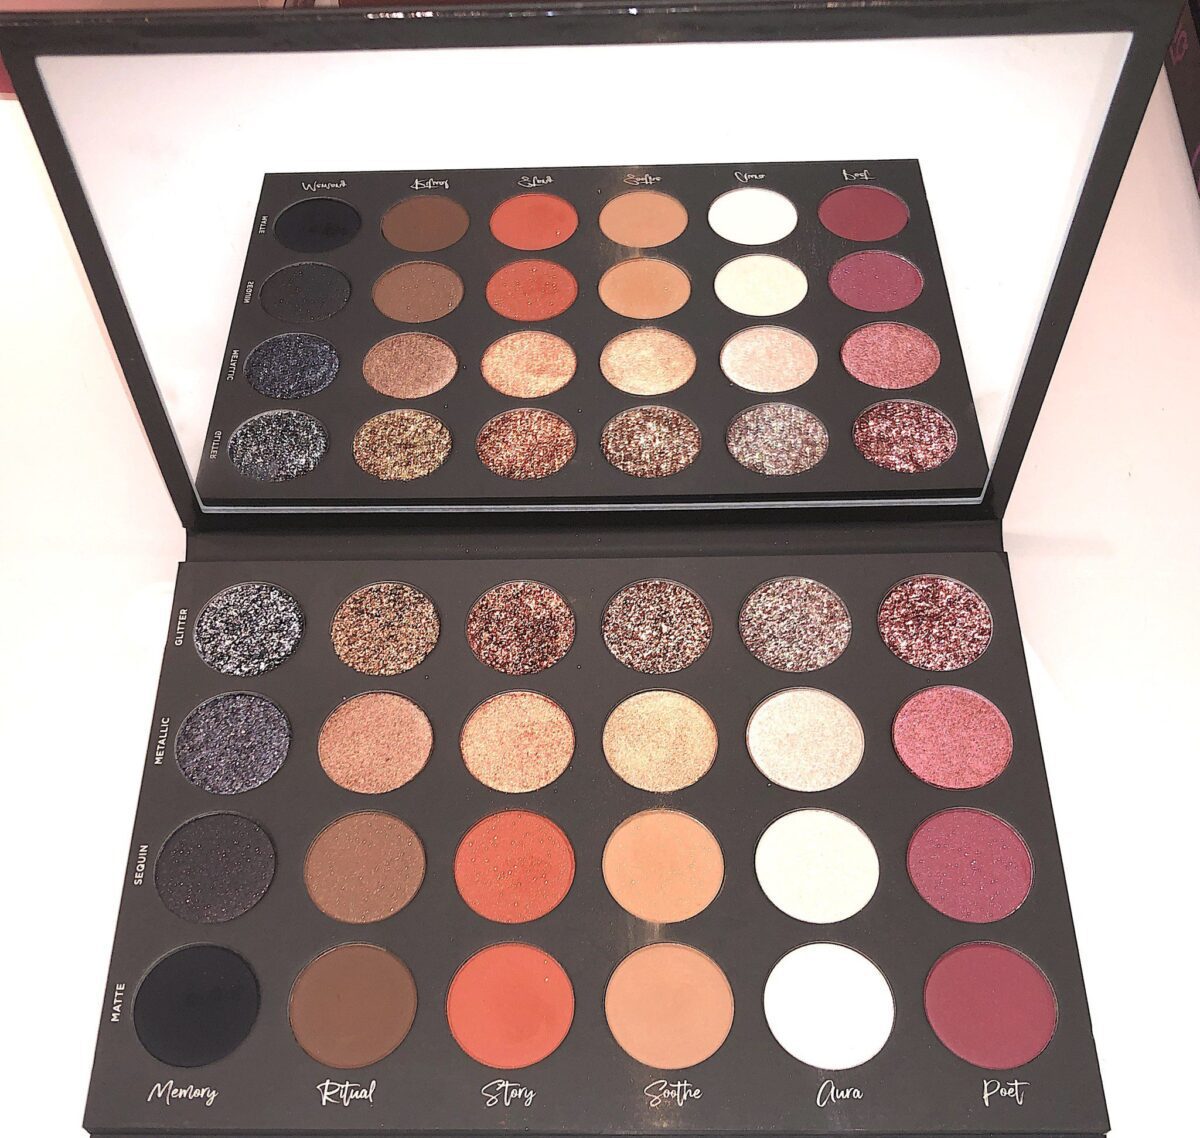 TATI'S FIRST EYESHADOW PALETTE INSIDE, THERE IS A LARGE MIRROR AND 24 EYESHADOW SHADES